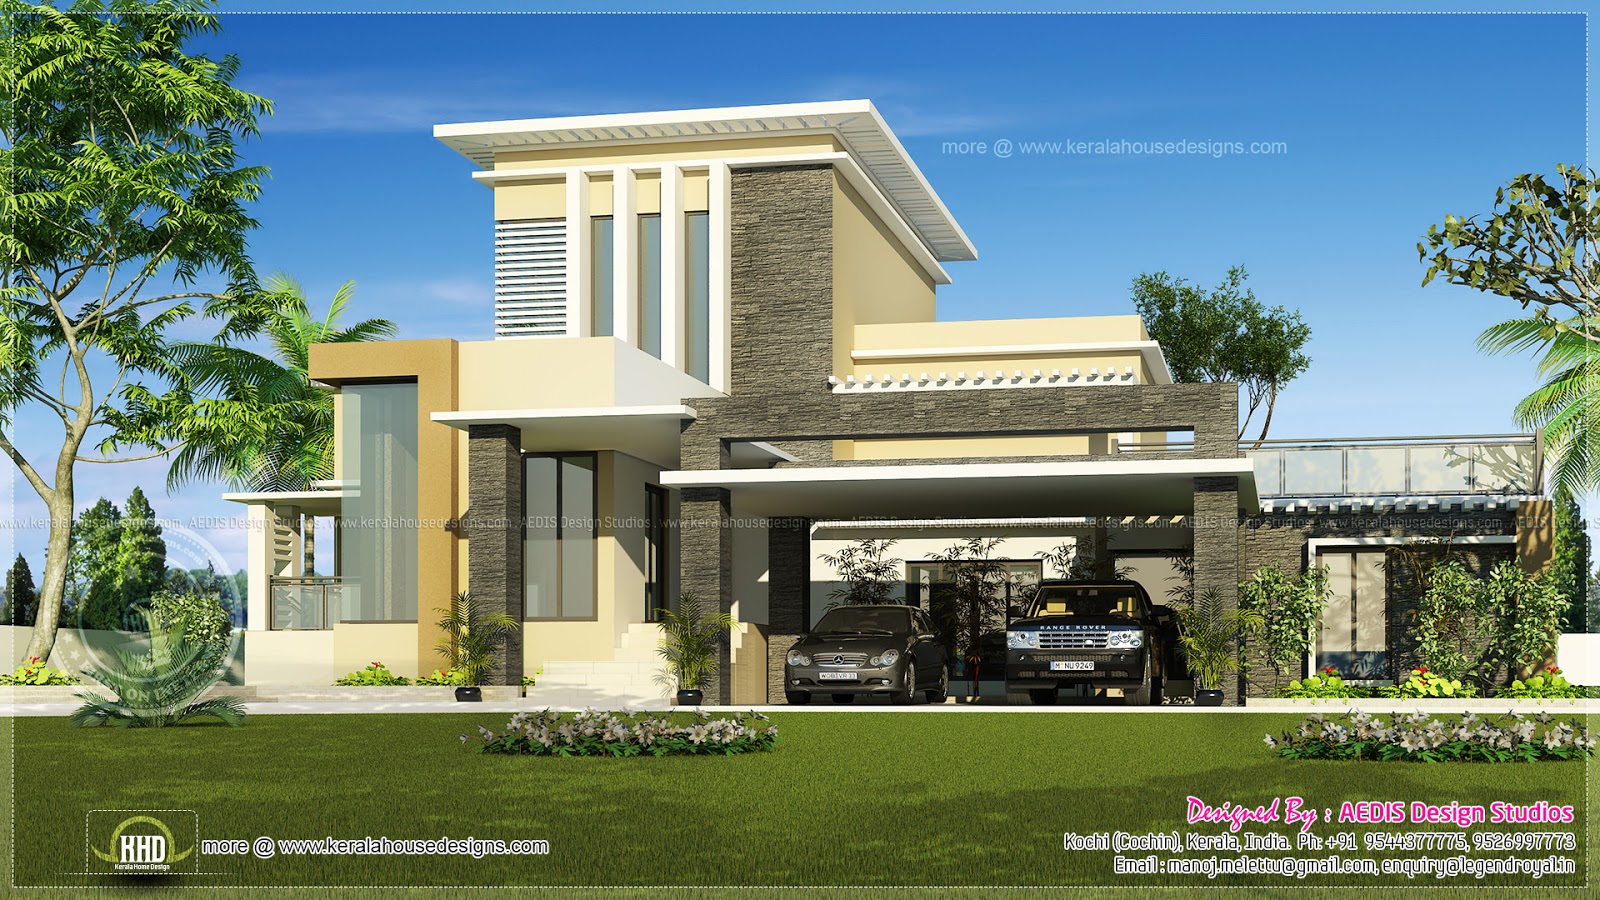  Flat  roof  contemporary  home  in 1750 sq ft Home  Kerala Plans 